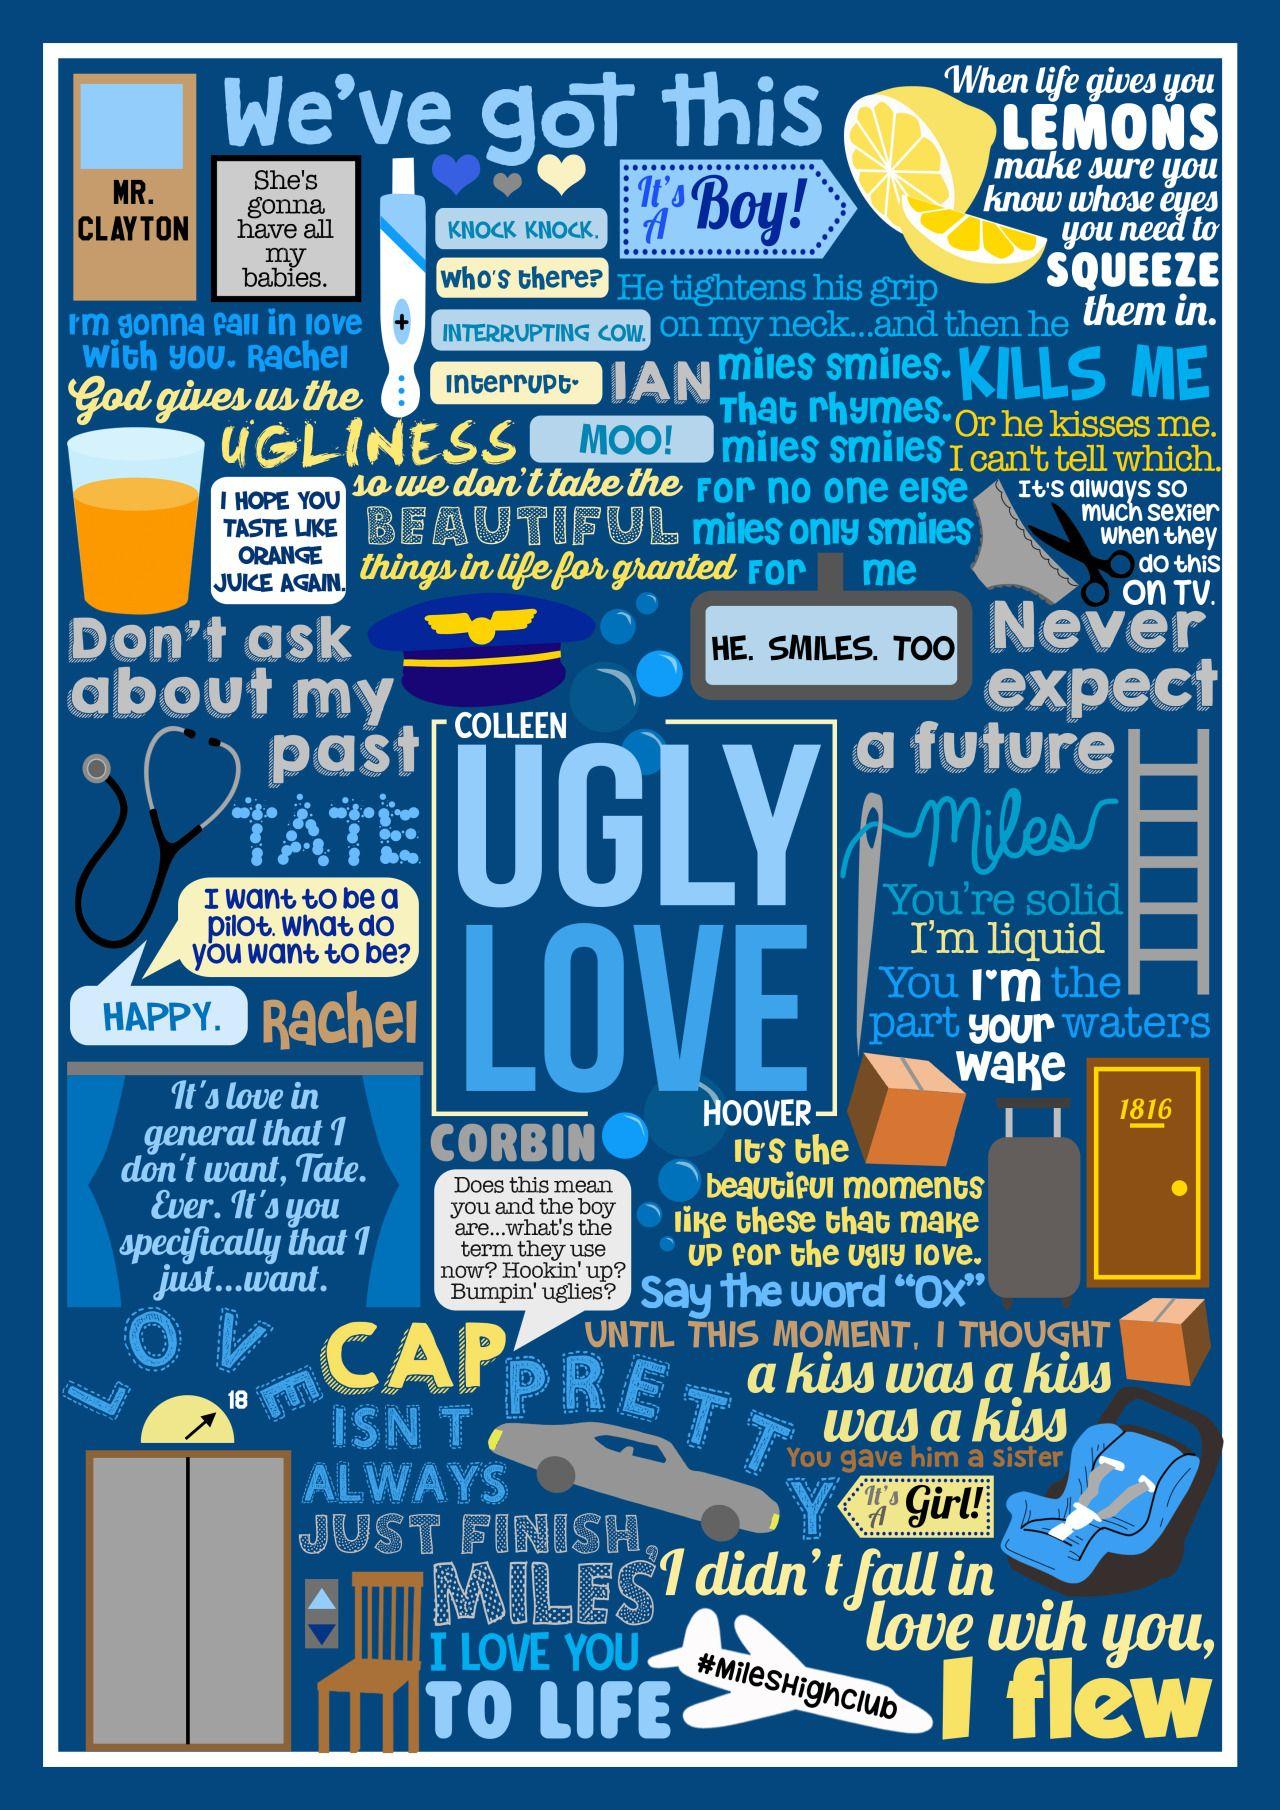 Colleen Hoover image Ugly Love collage HD wallpaper and background